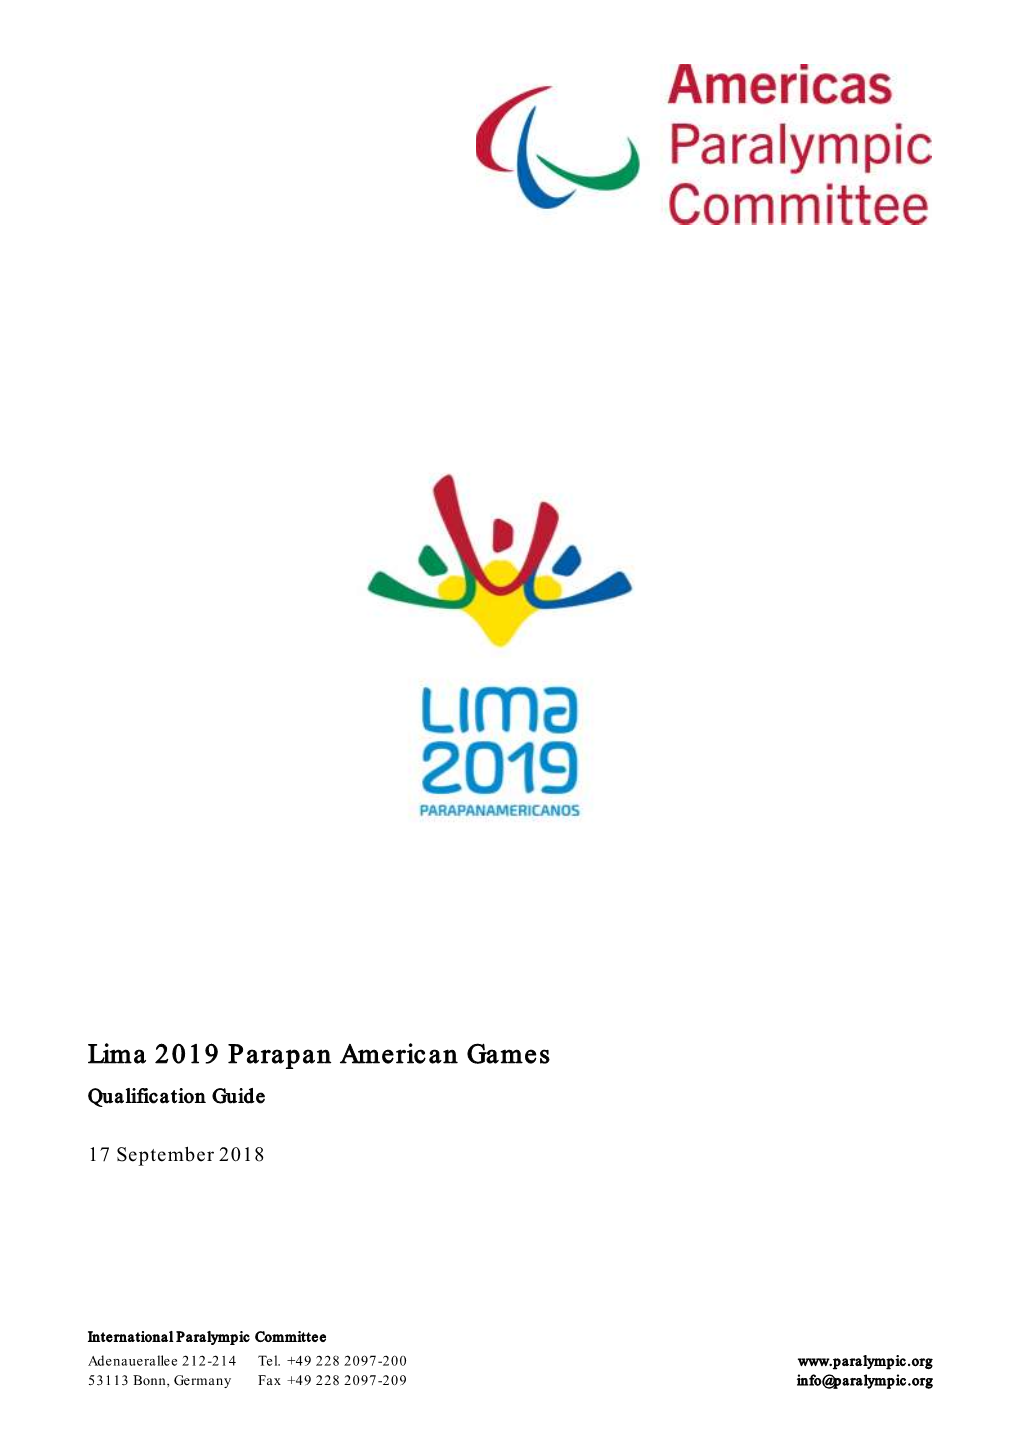 Lima 2019 Parapan American Games Qualification Guide